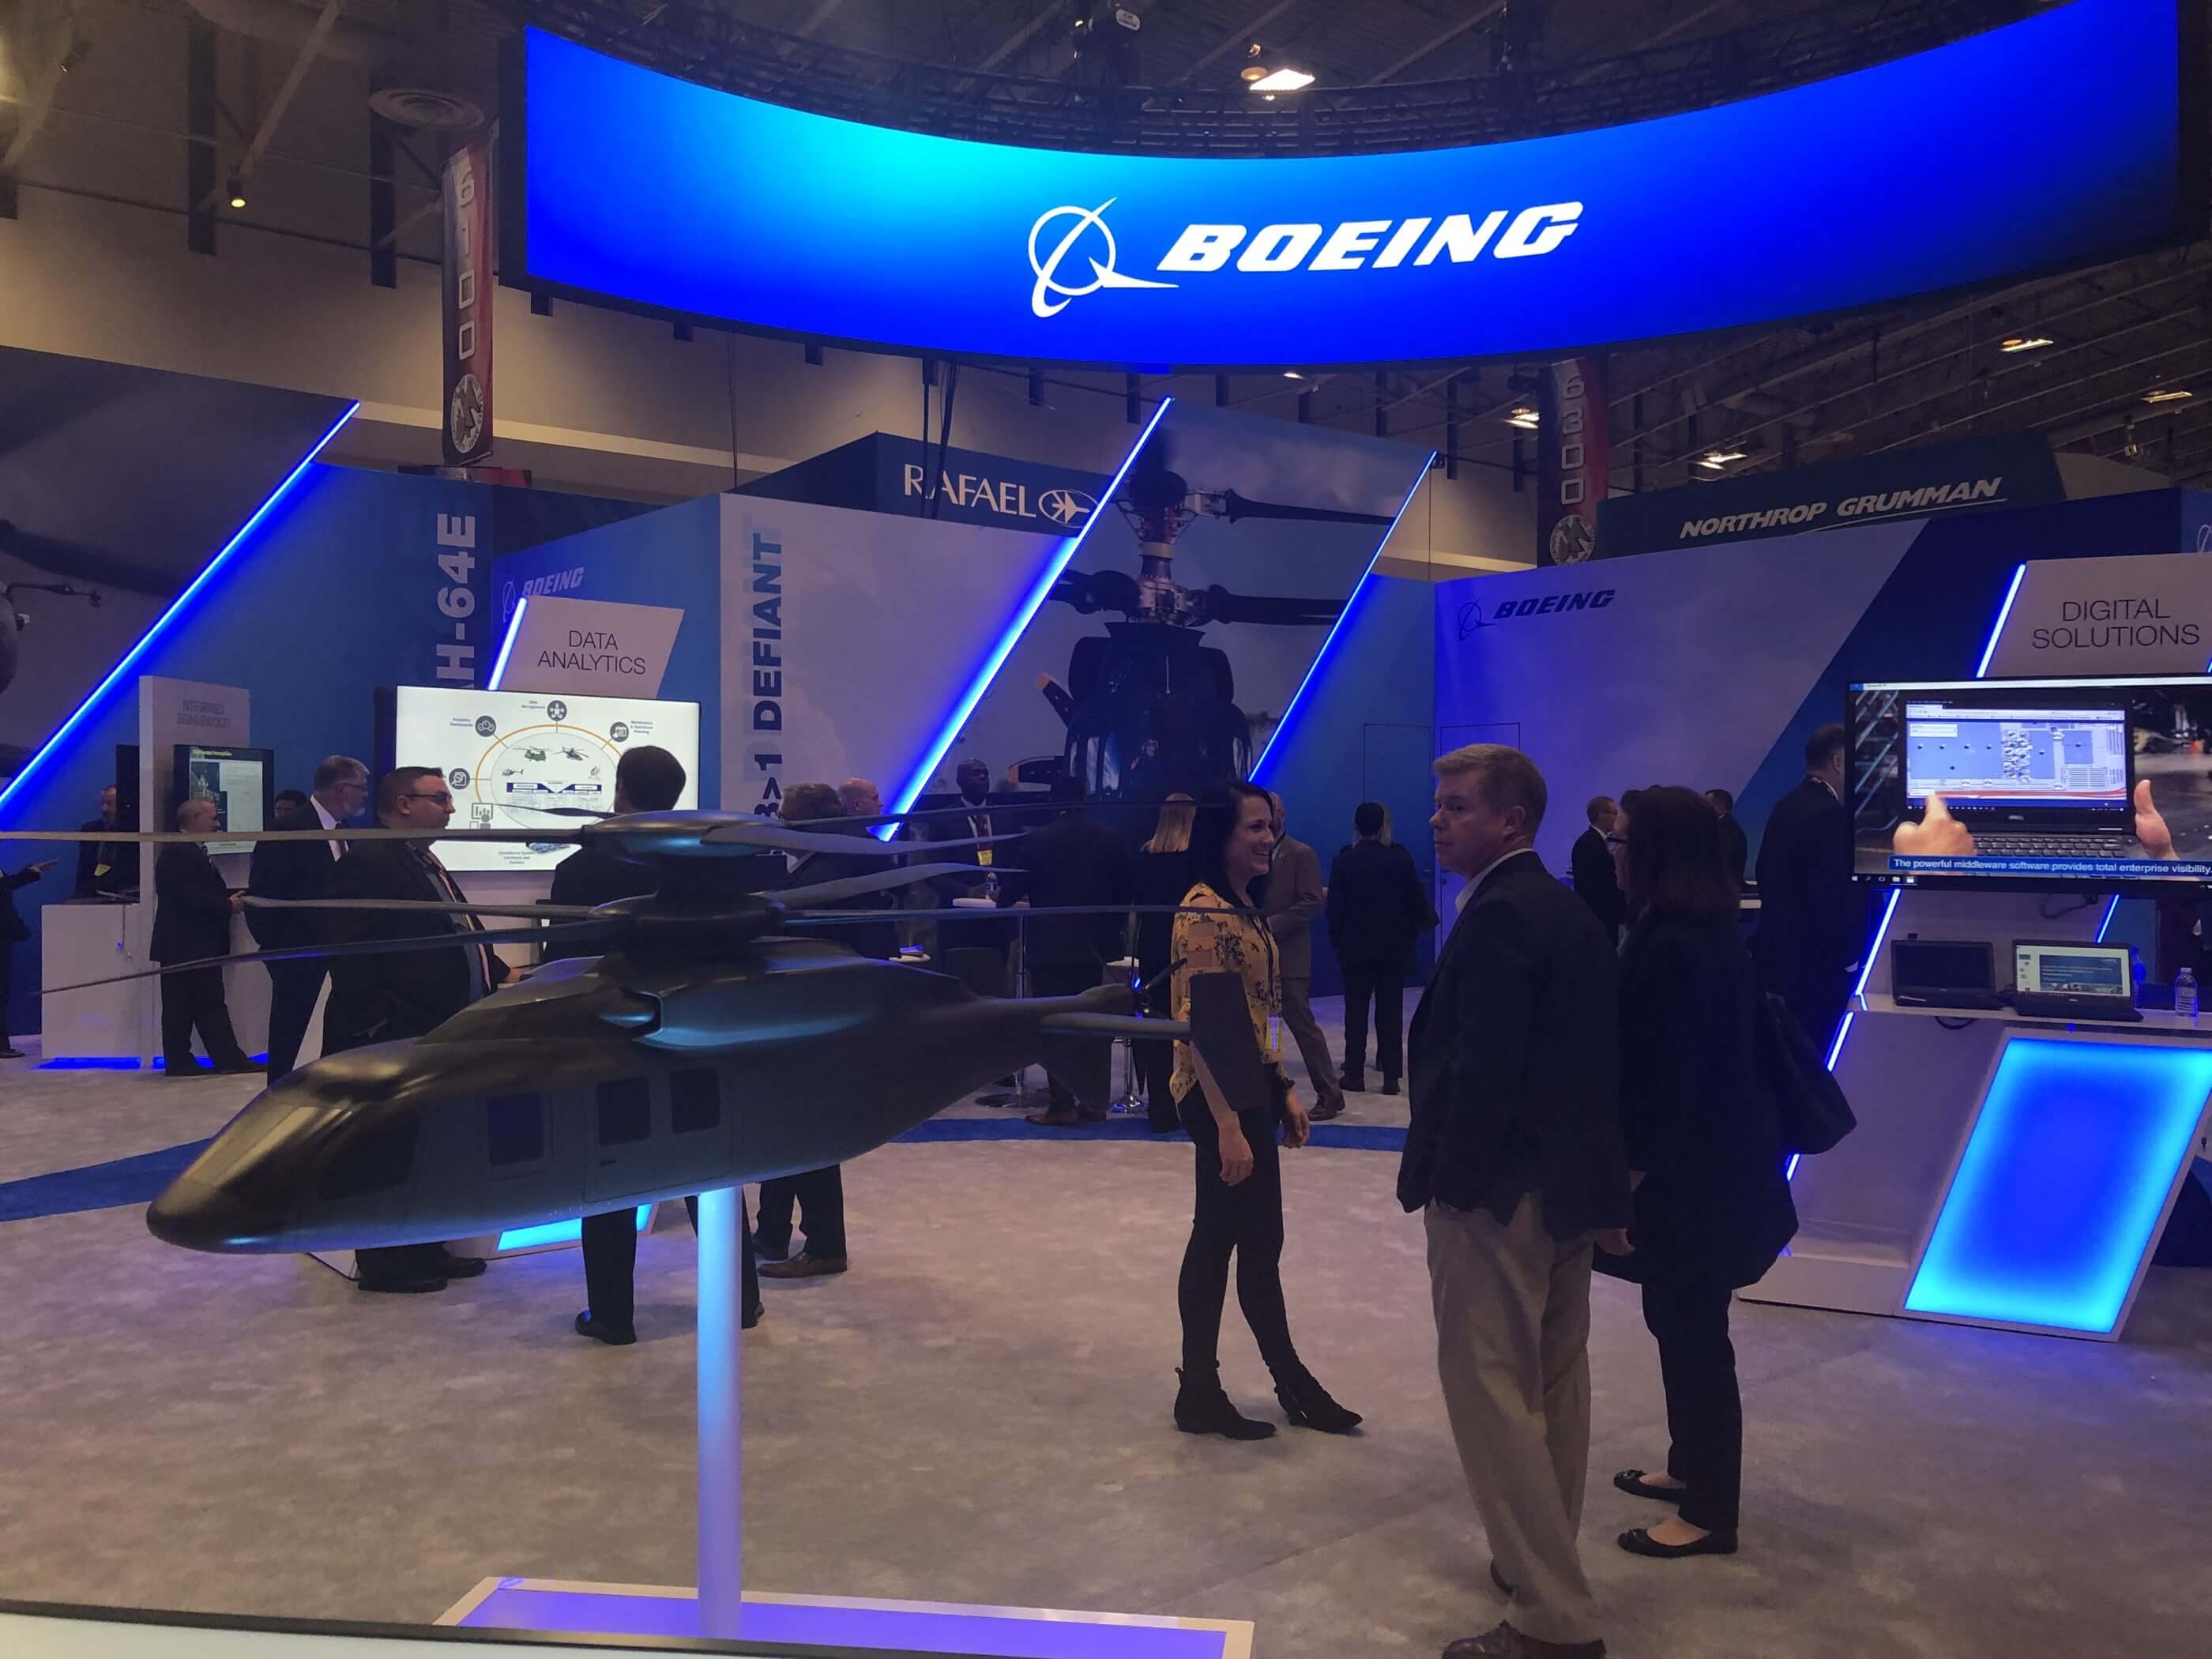 Boeing AUSA booth